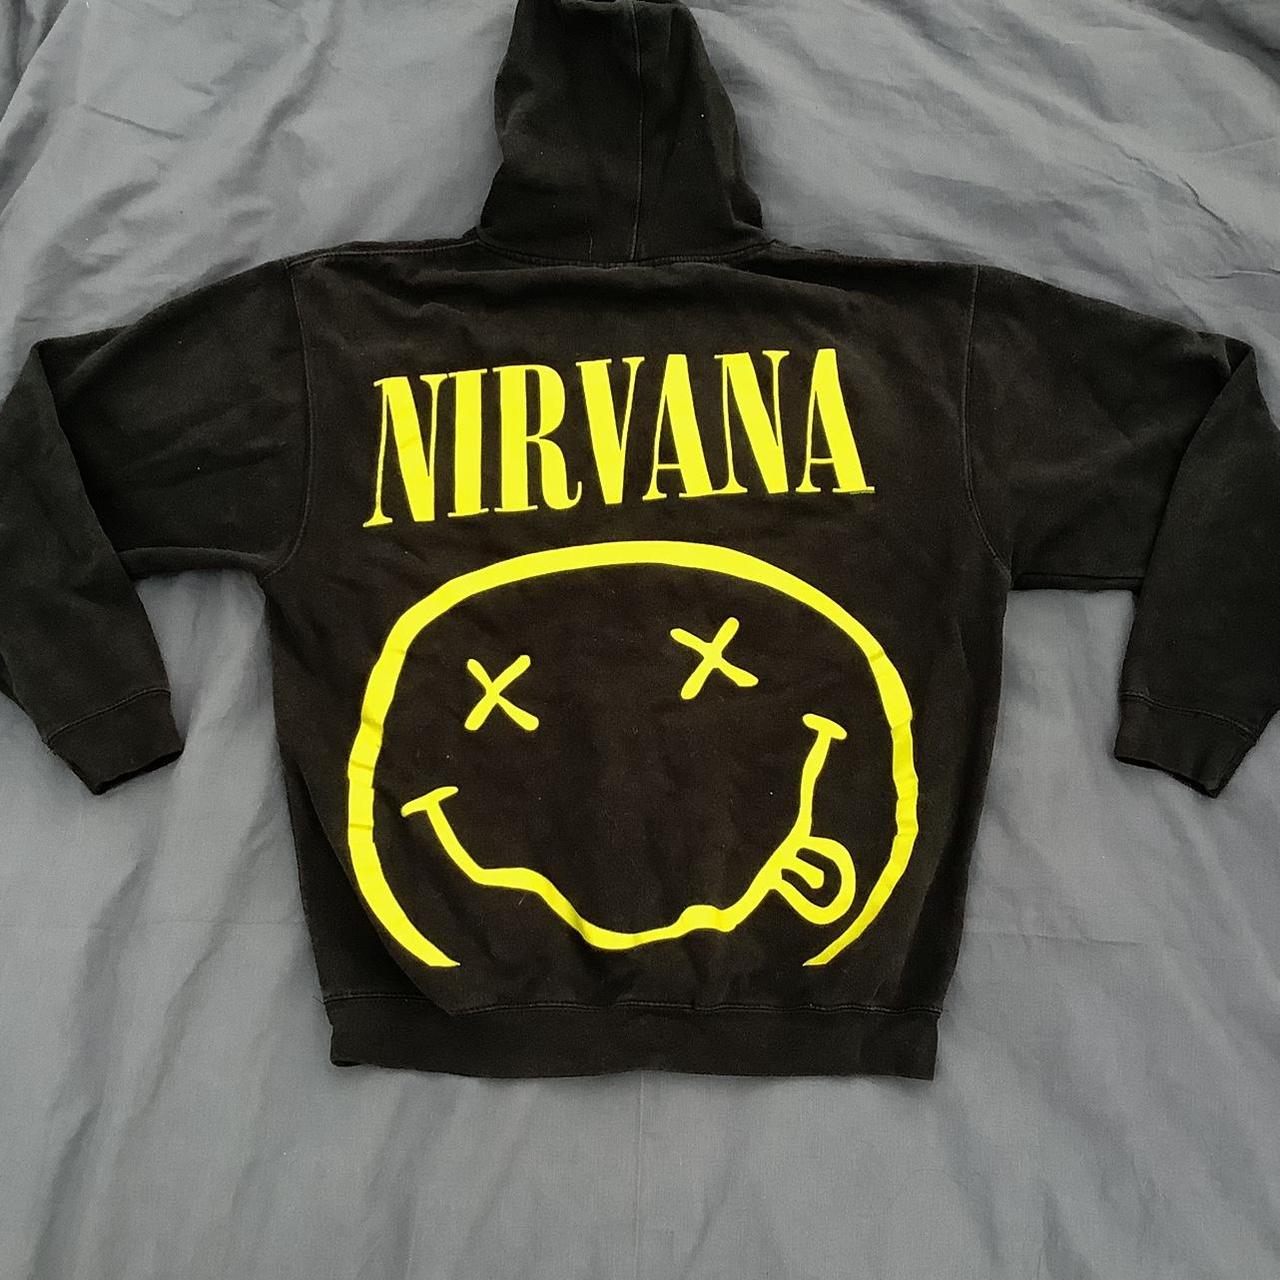 Urban Outfitters Men's Black and Yellow Hoodie